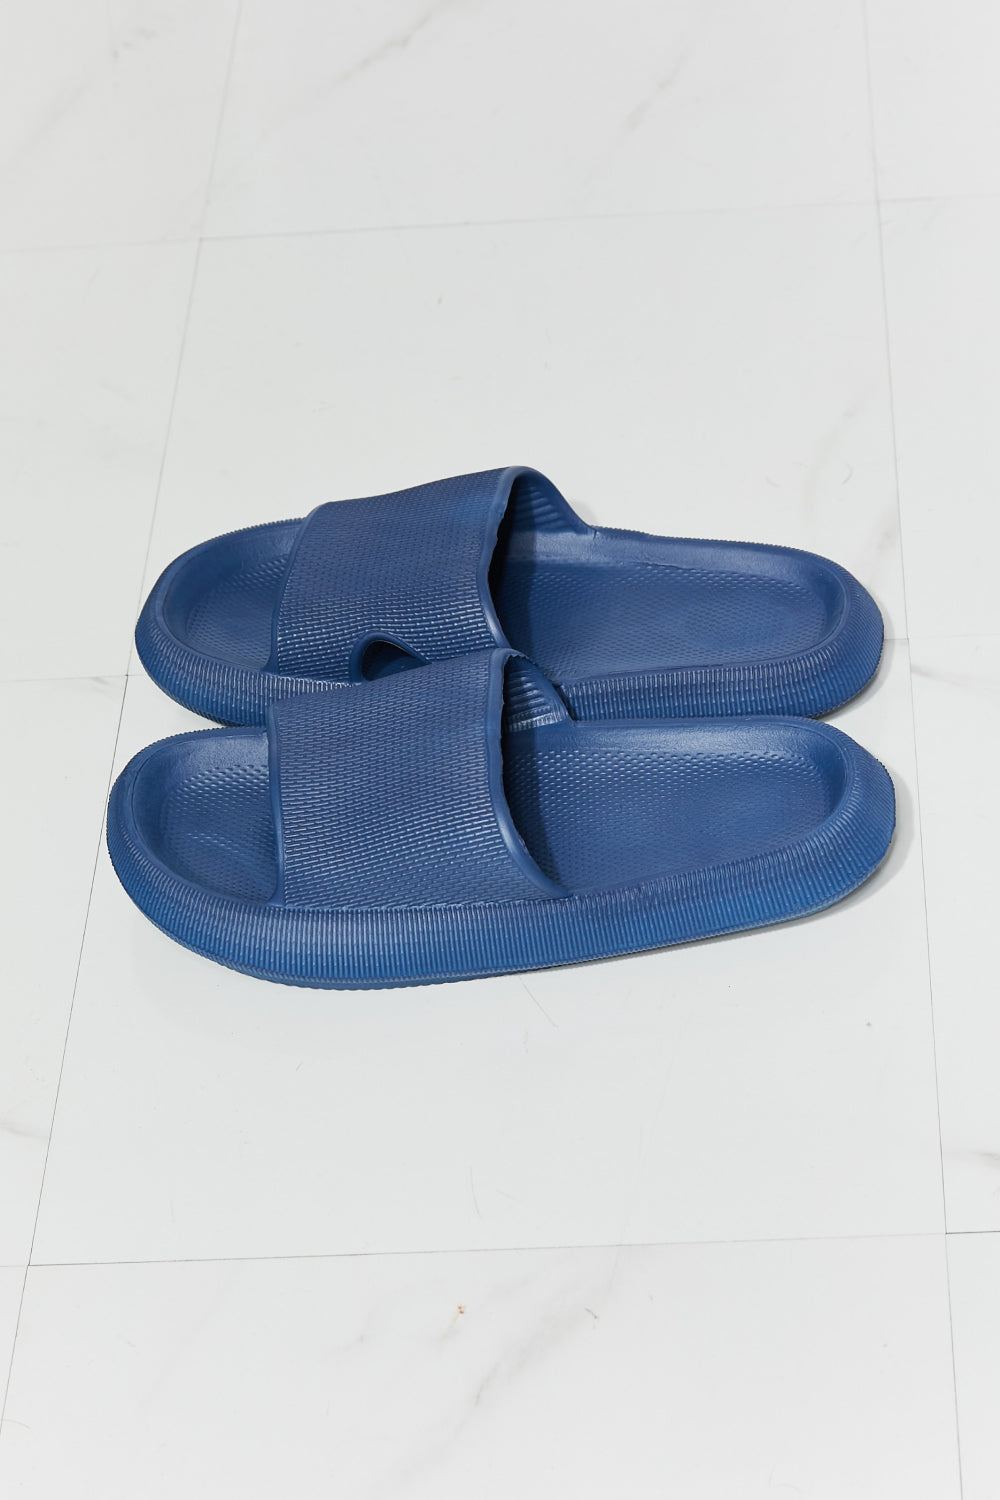 MMShoes Arms Around Me Open Toe Slide in Navy - Tigbul's Fashion